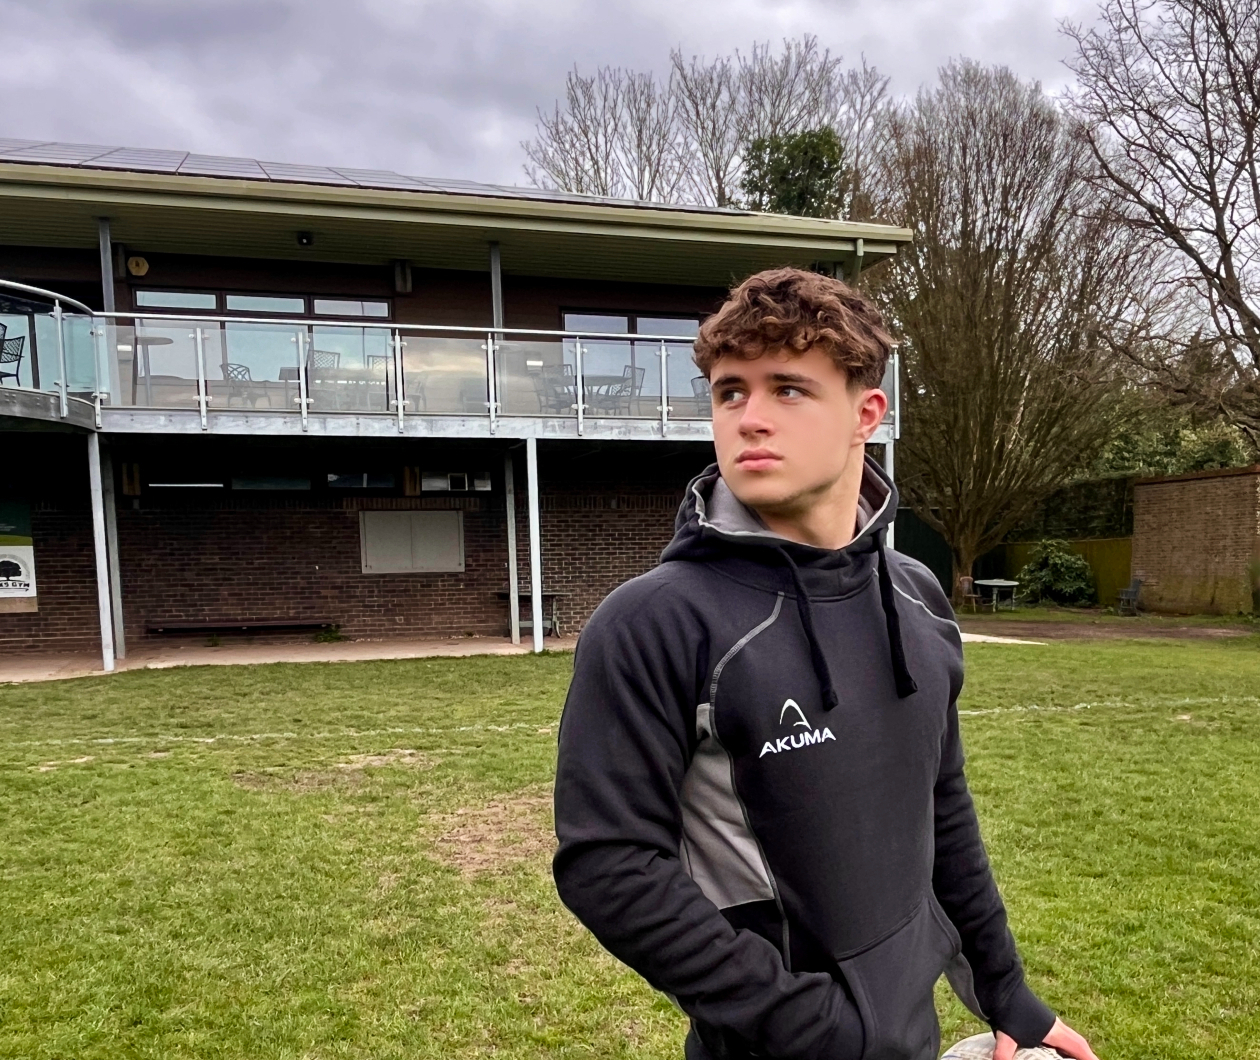 Akuma Sports recognises upcoming rugby talent Ethan Karr, a hooker for Harlequins PDG, who joins the Akuma family as their latest brand ambassador